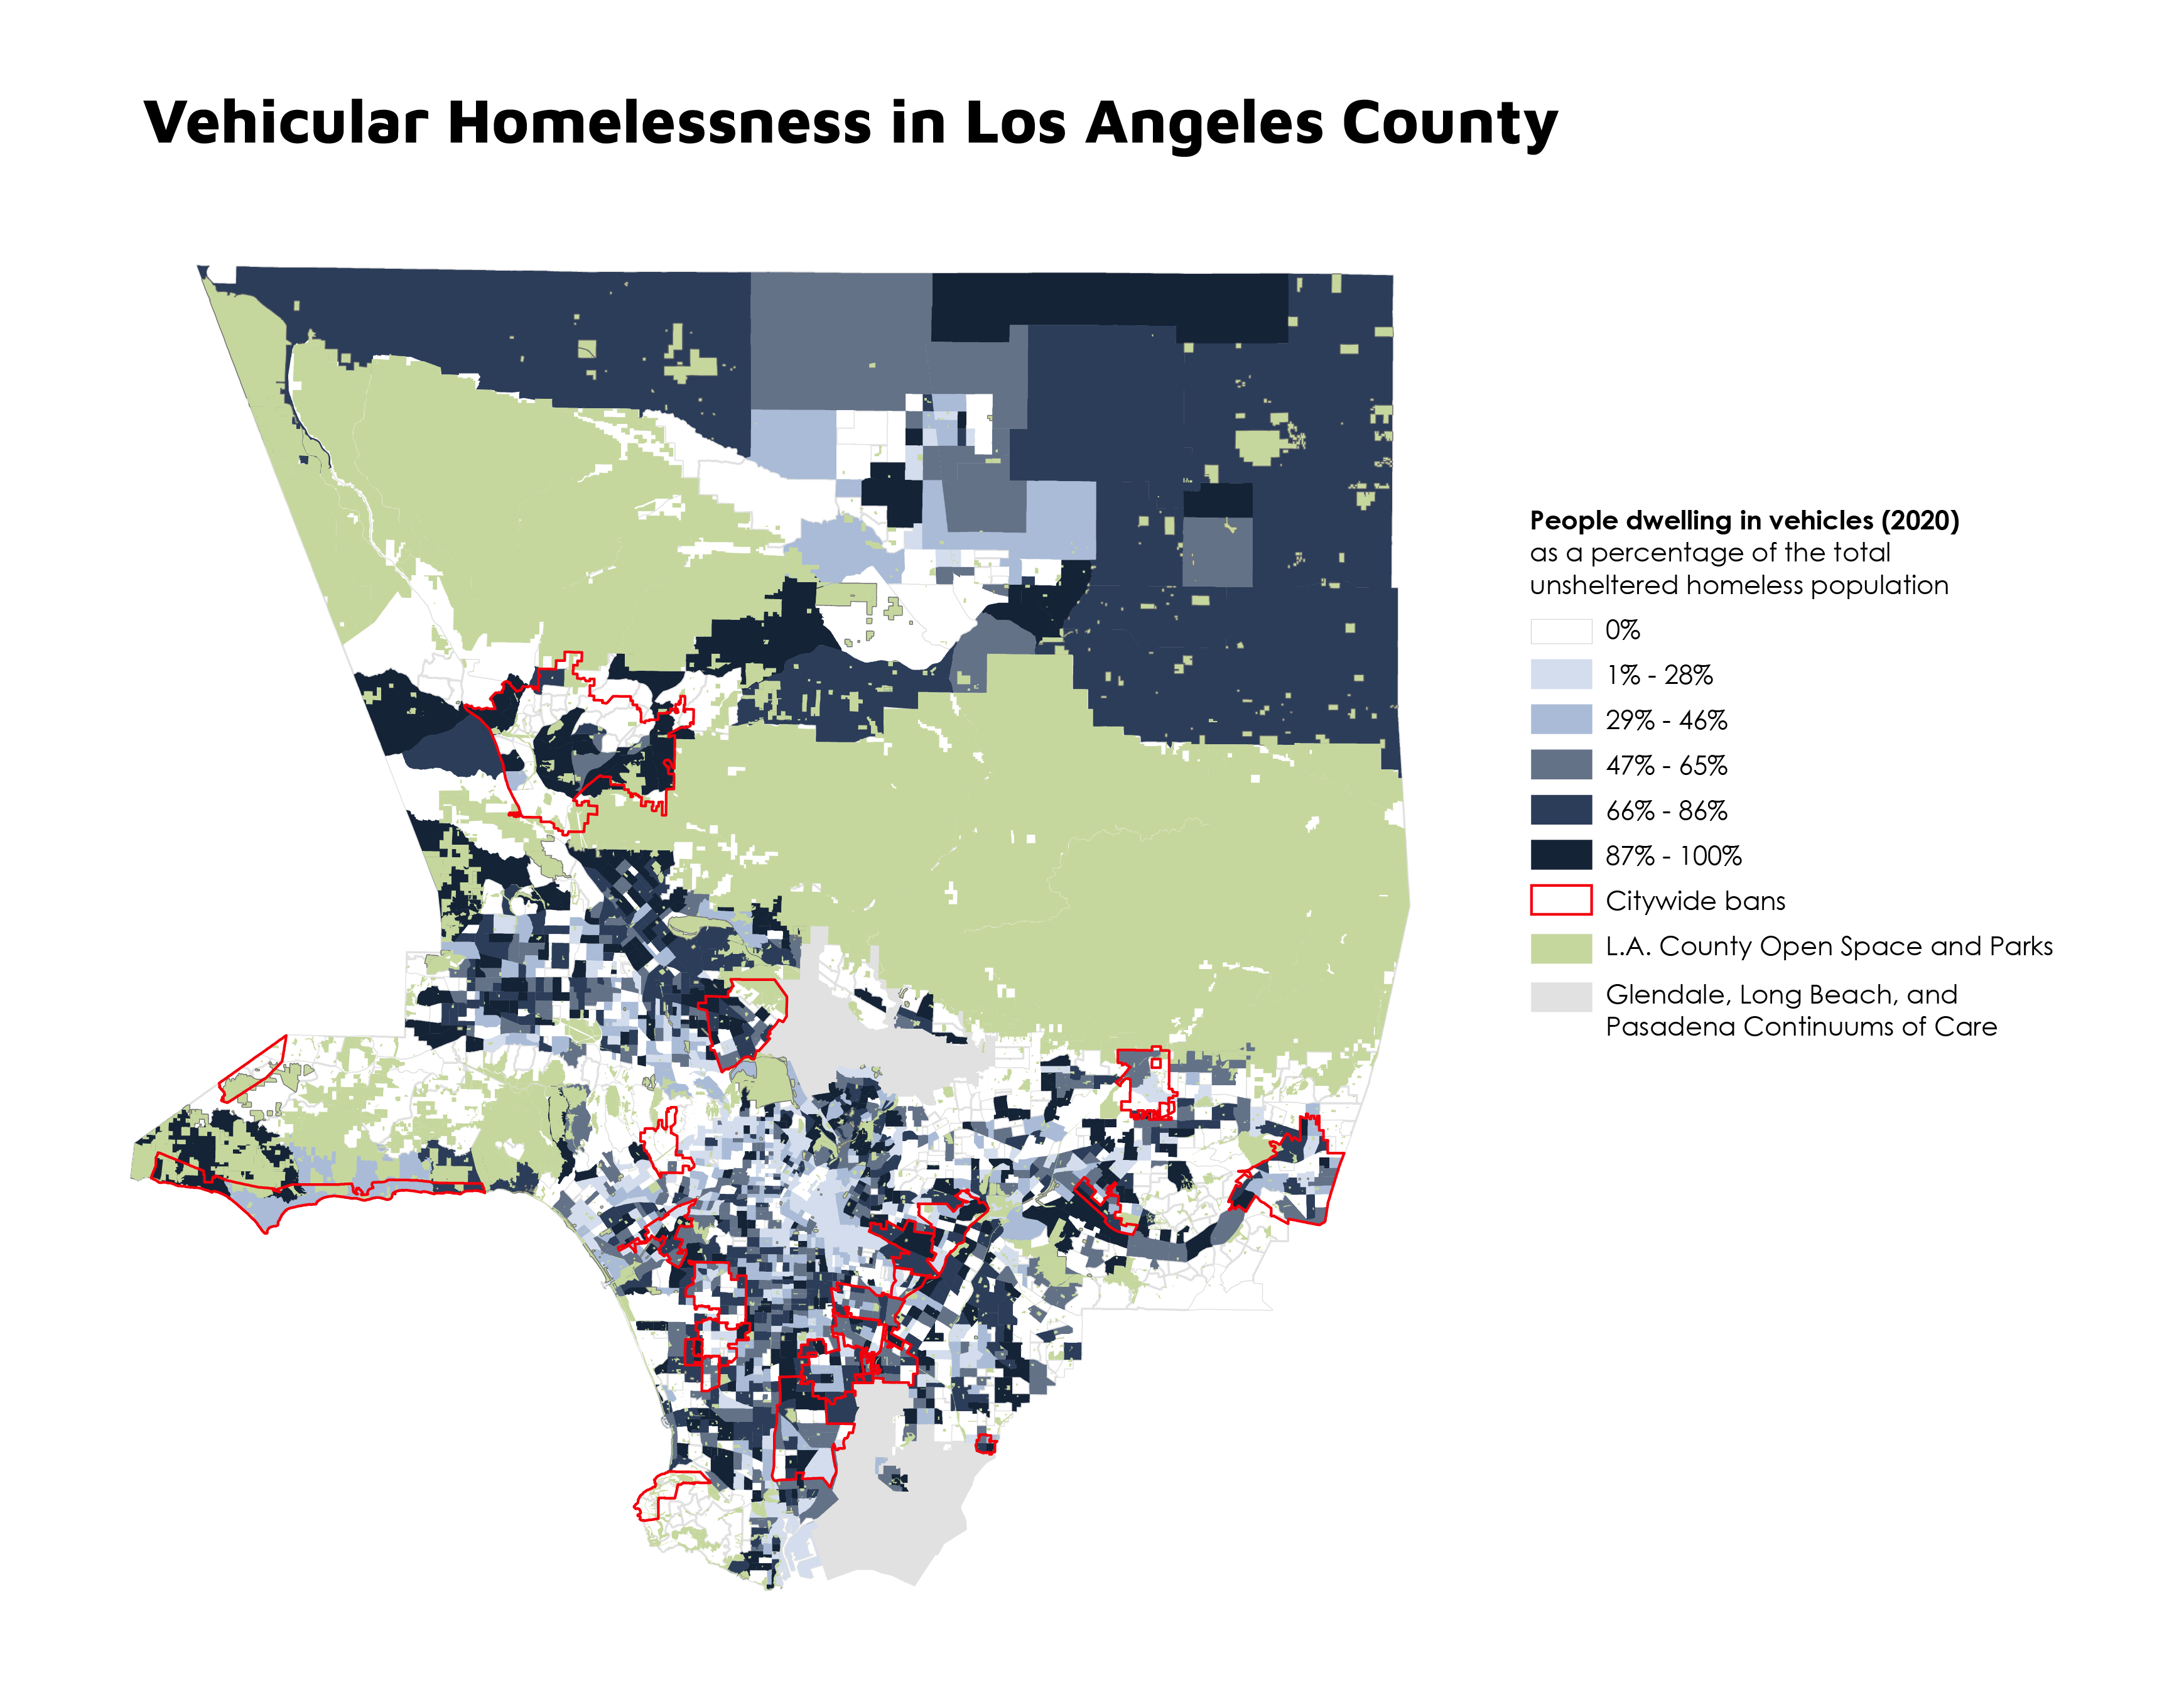 Vehicular homelessness by census tract as a percentage of the total unsheltered population in Los Angeles County